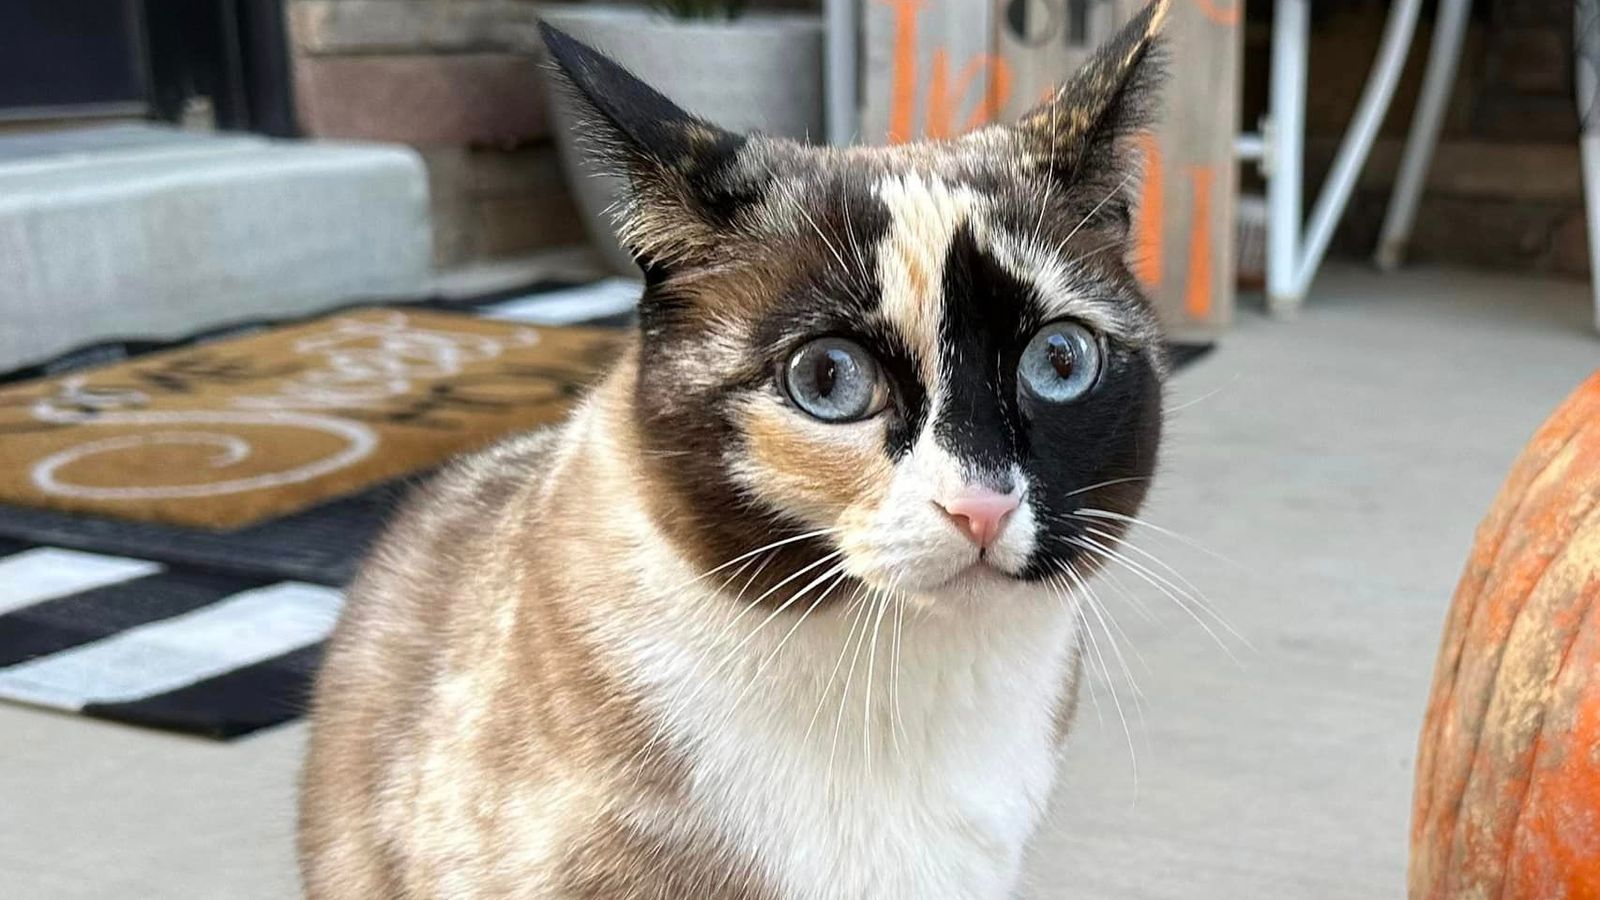 Utah pet cat found after week trapped inside Amazon return box to California